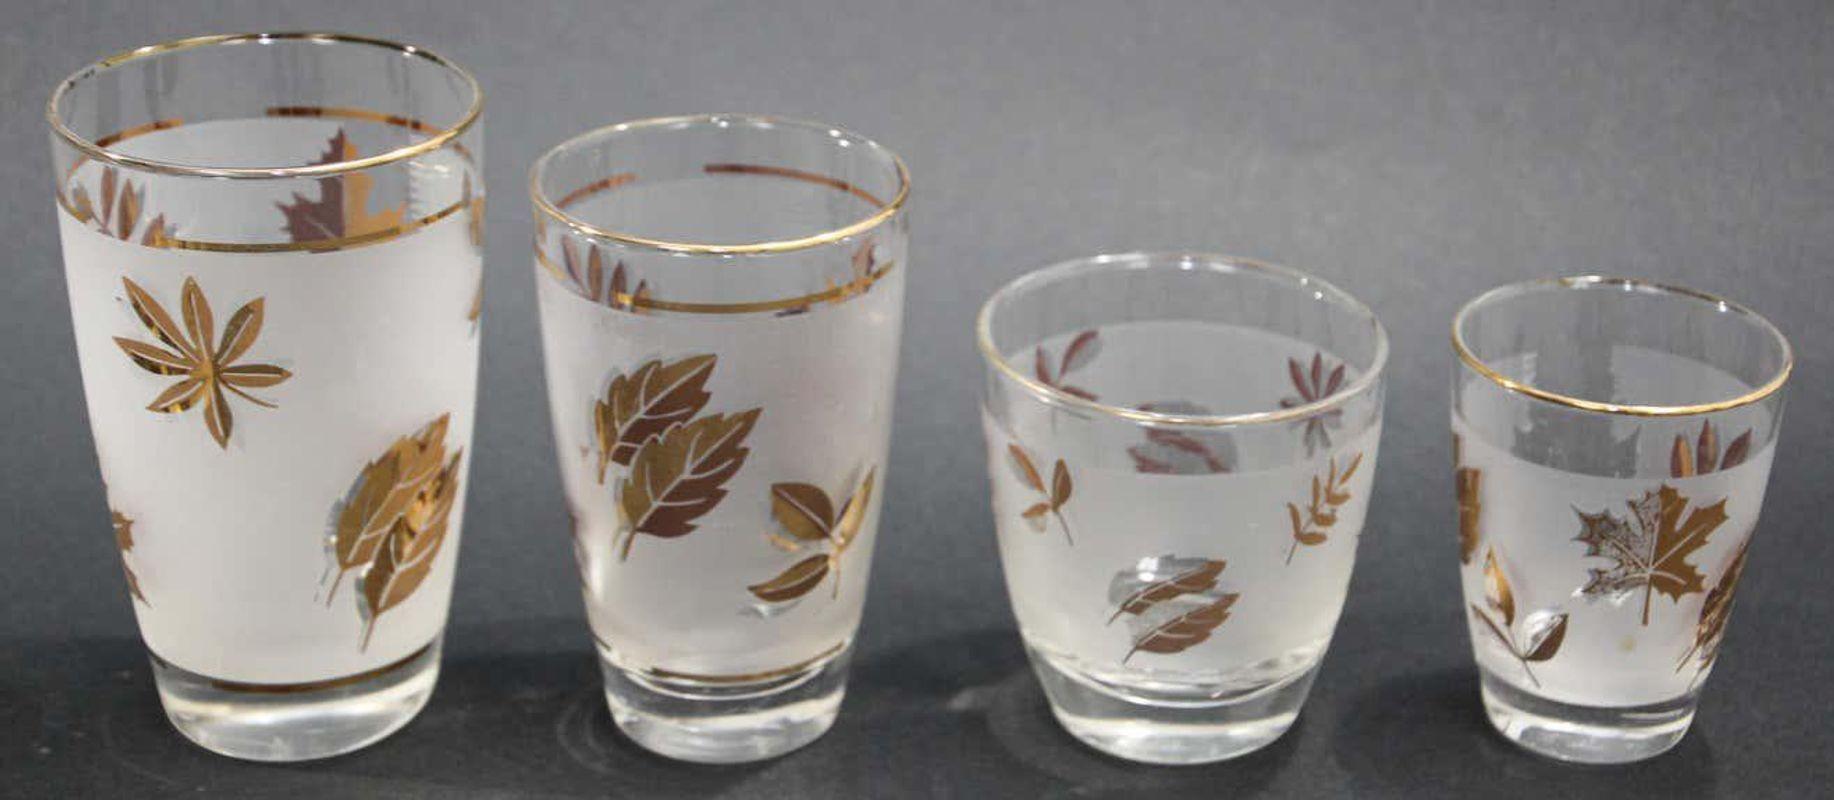 Vintage MCM Libbey Frosted & Golden Foliage Cocktail Glasses, Set of 13 In Good Condition For Sale In North Hollywood, CA